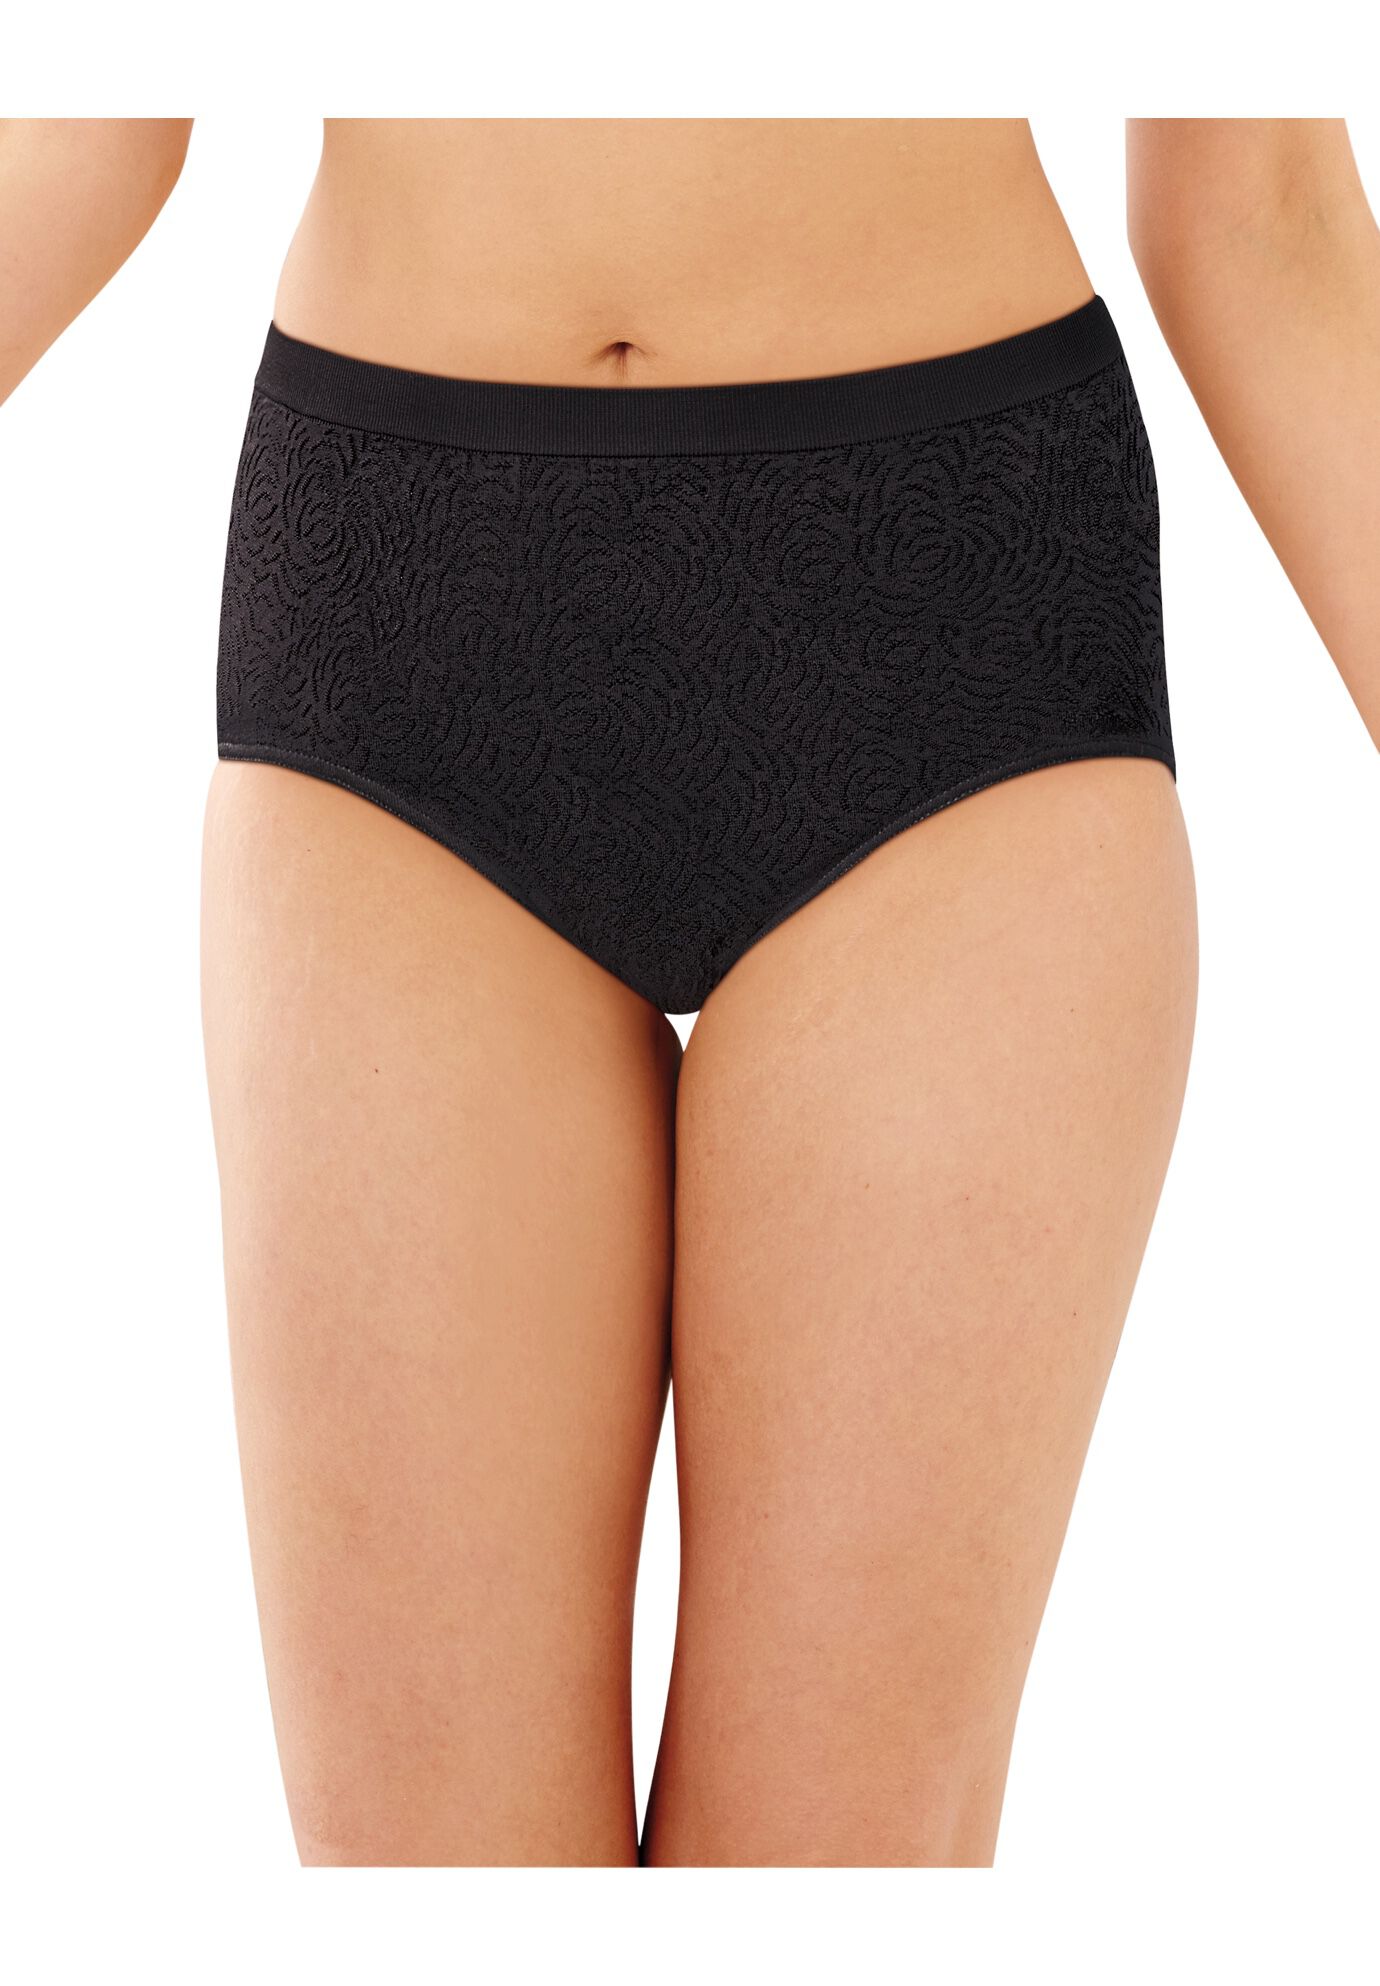 Plus Size Women's Comfort Revolution Brief by Bali in Black Damask (Size 9)